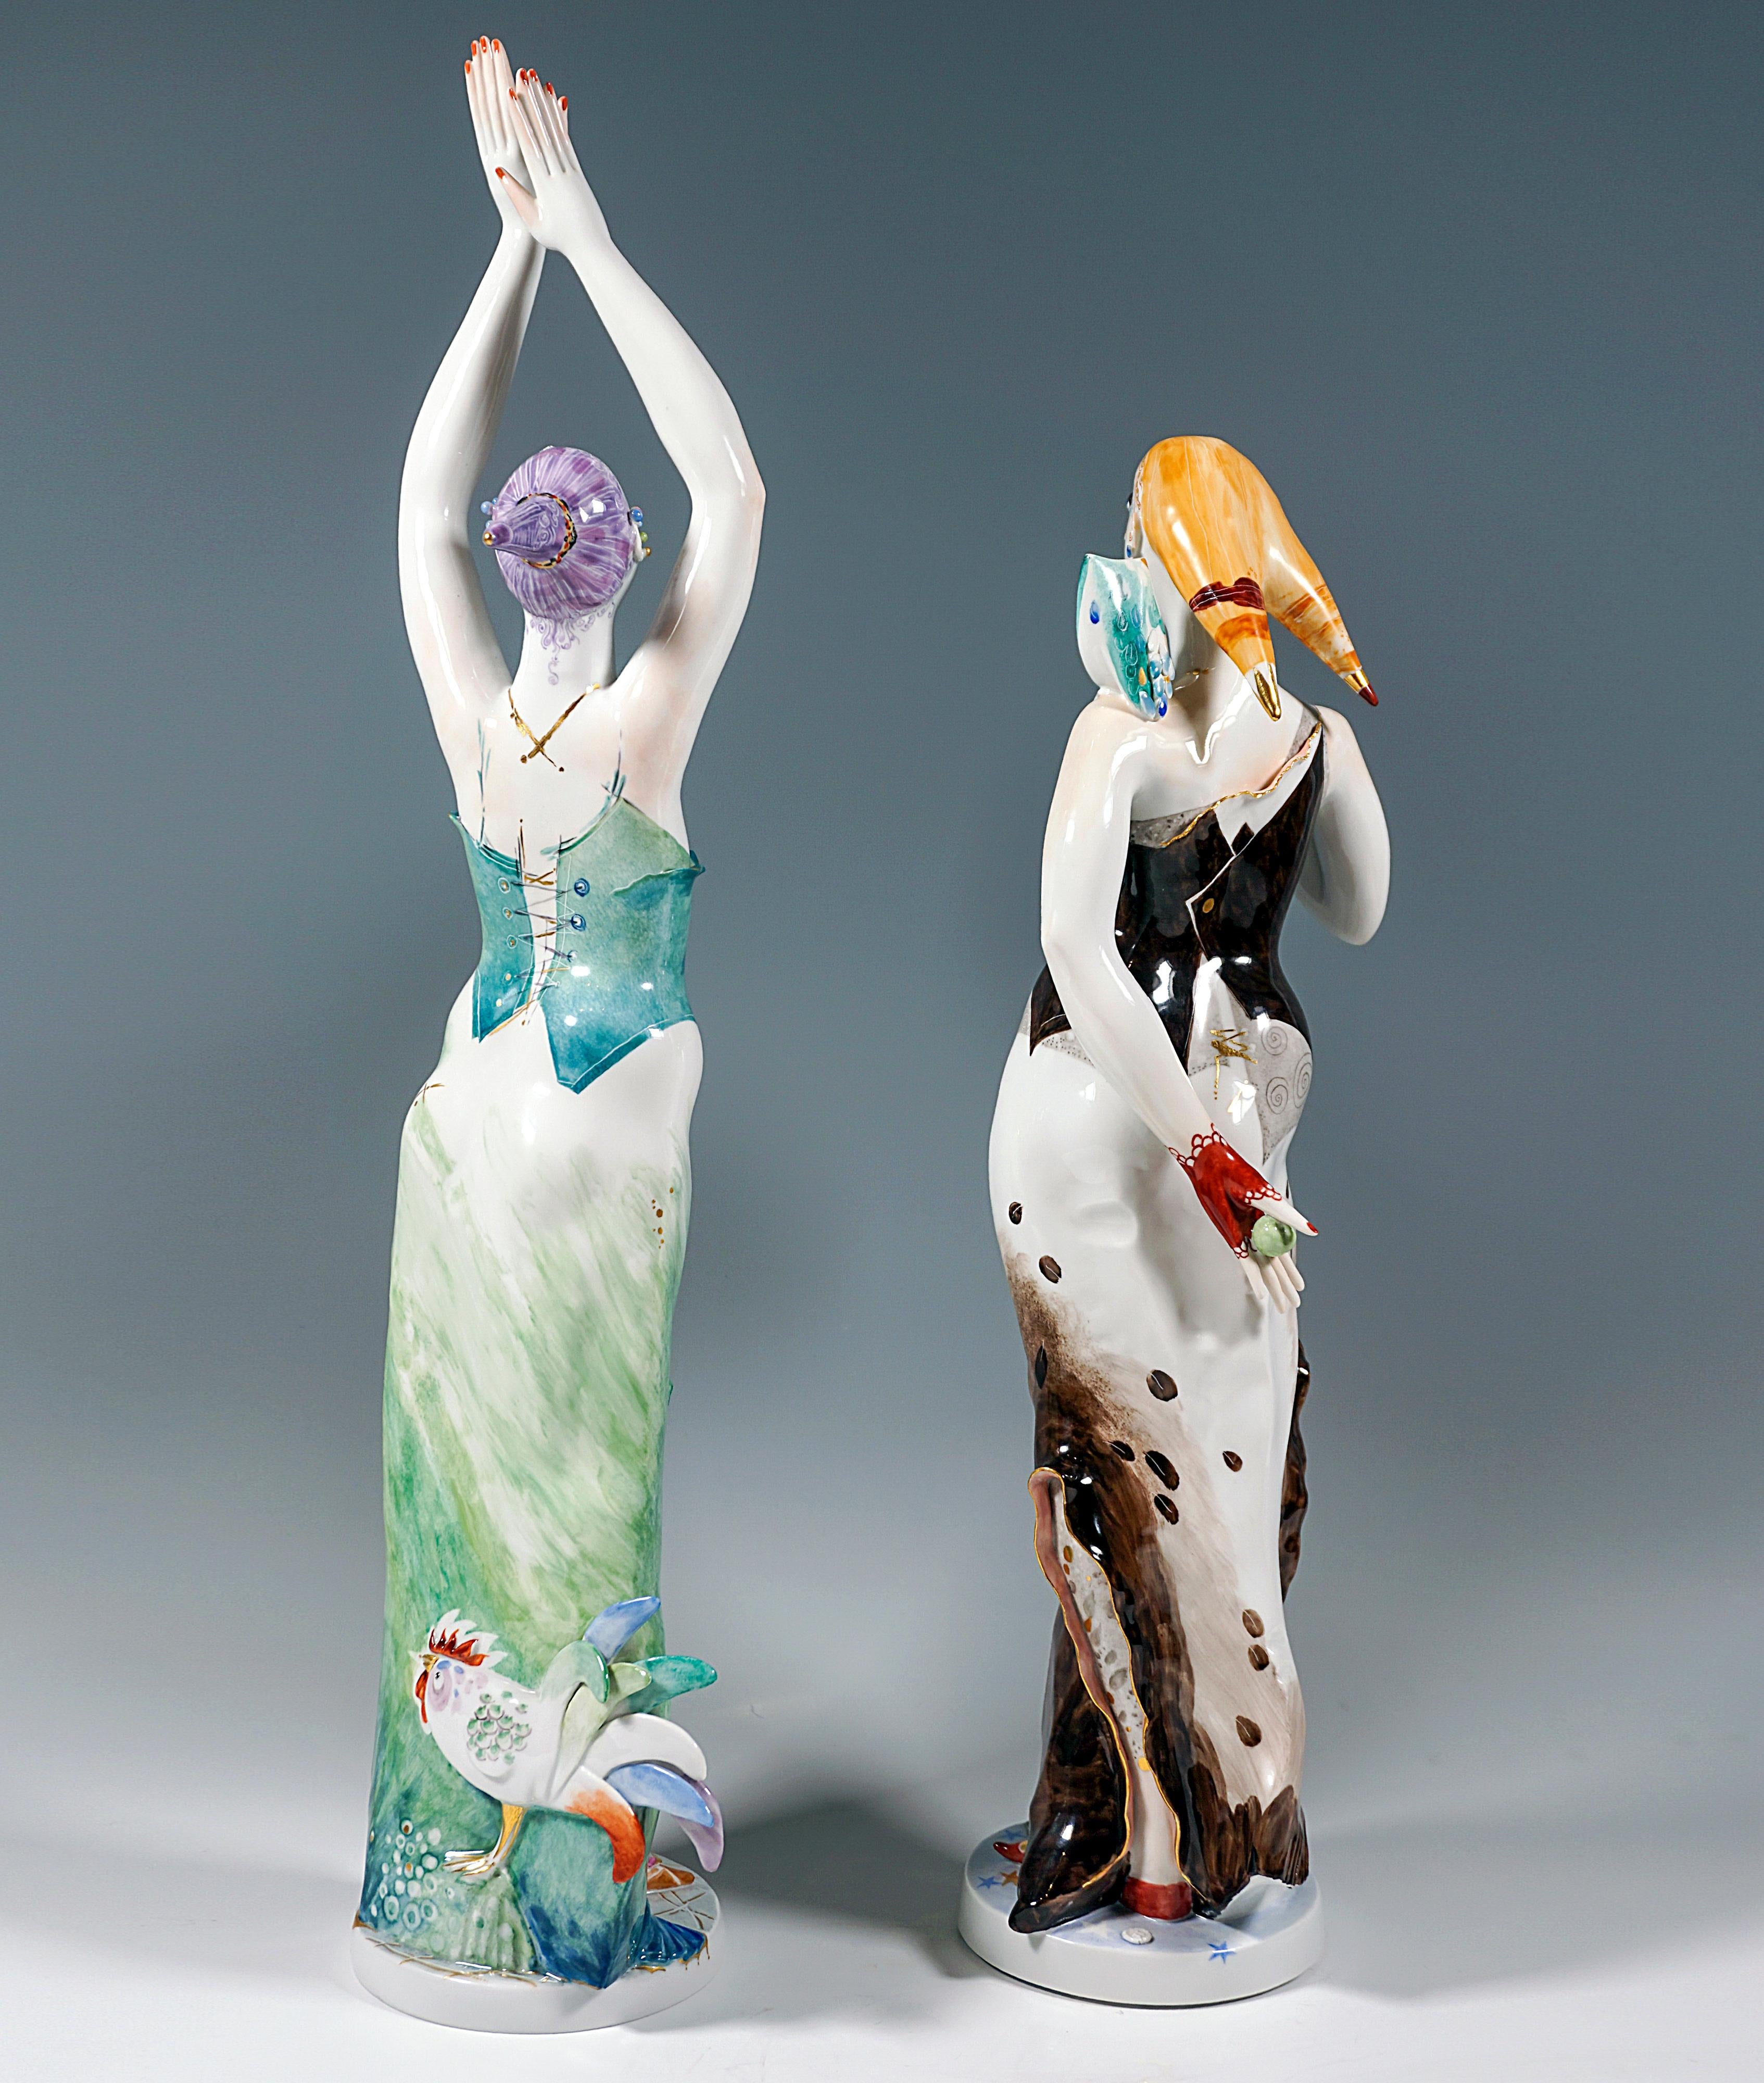 A pair of large, excellently crafted allegories - Day & Night in the form of two slender female figures celebrating femininity:
The figure representing the Day dressed in fresh, spring-like shades of green-turquoise-blue, her gaze turned upwards